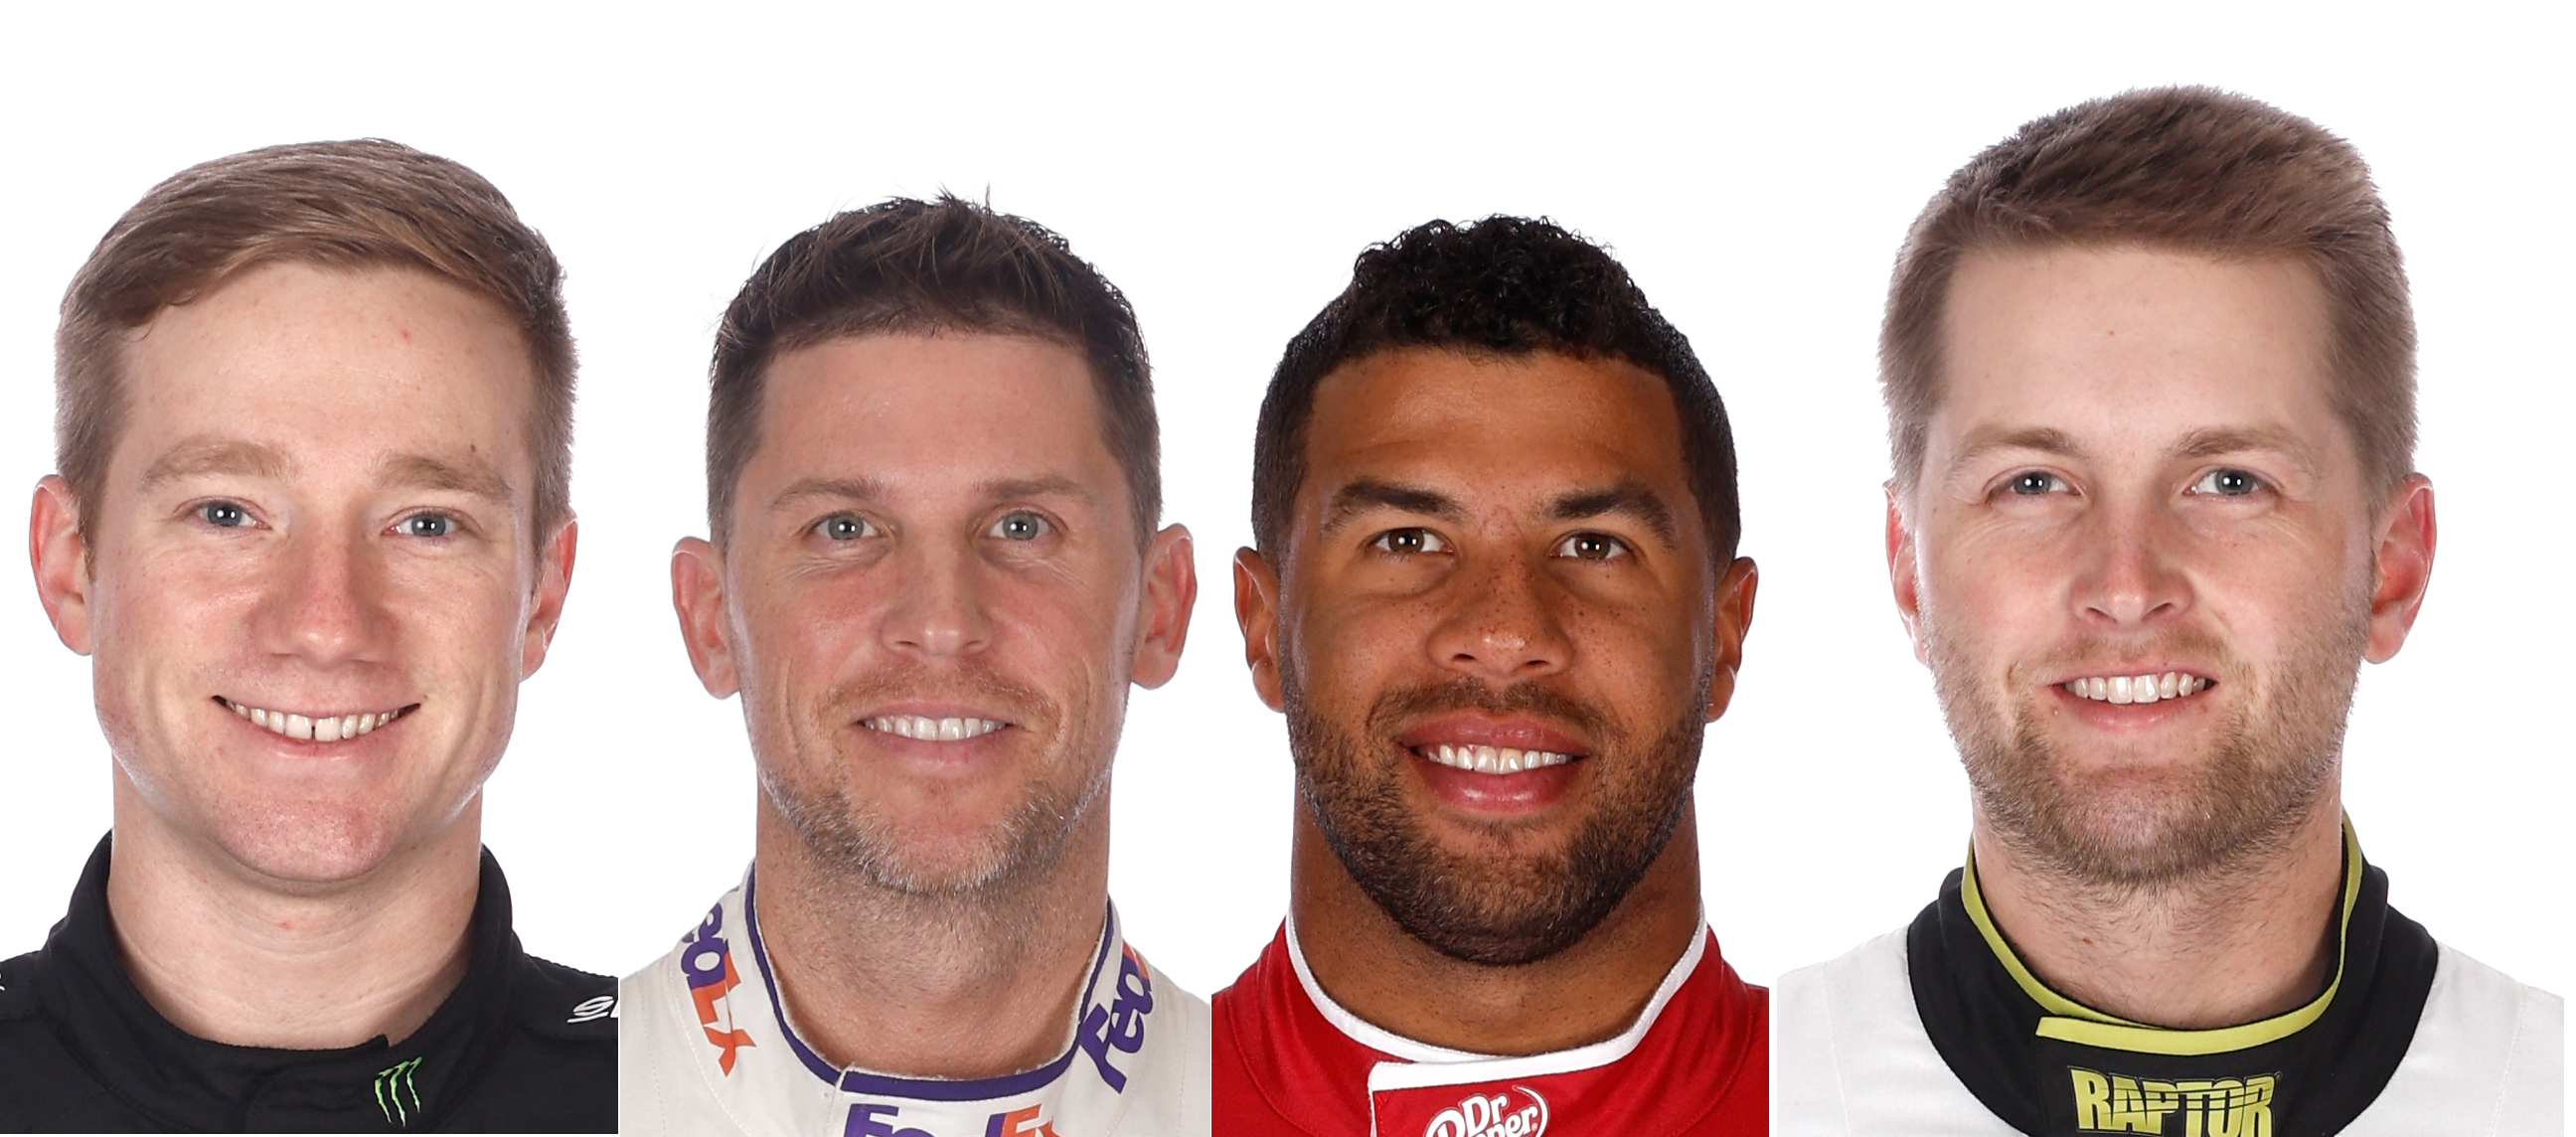 One of these "Fab Four" racers may win Sunday's AdventHealth 400 at Kansas. (Photo: Chris Graythen | Getty Images)